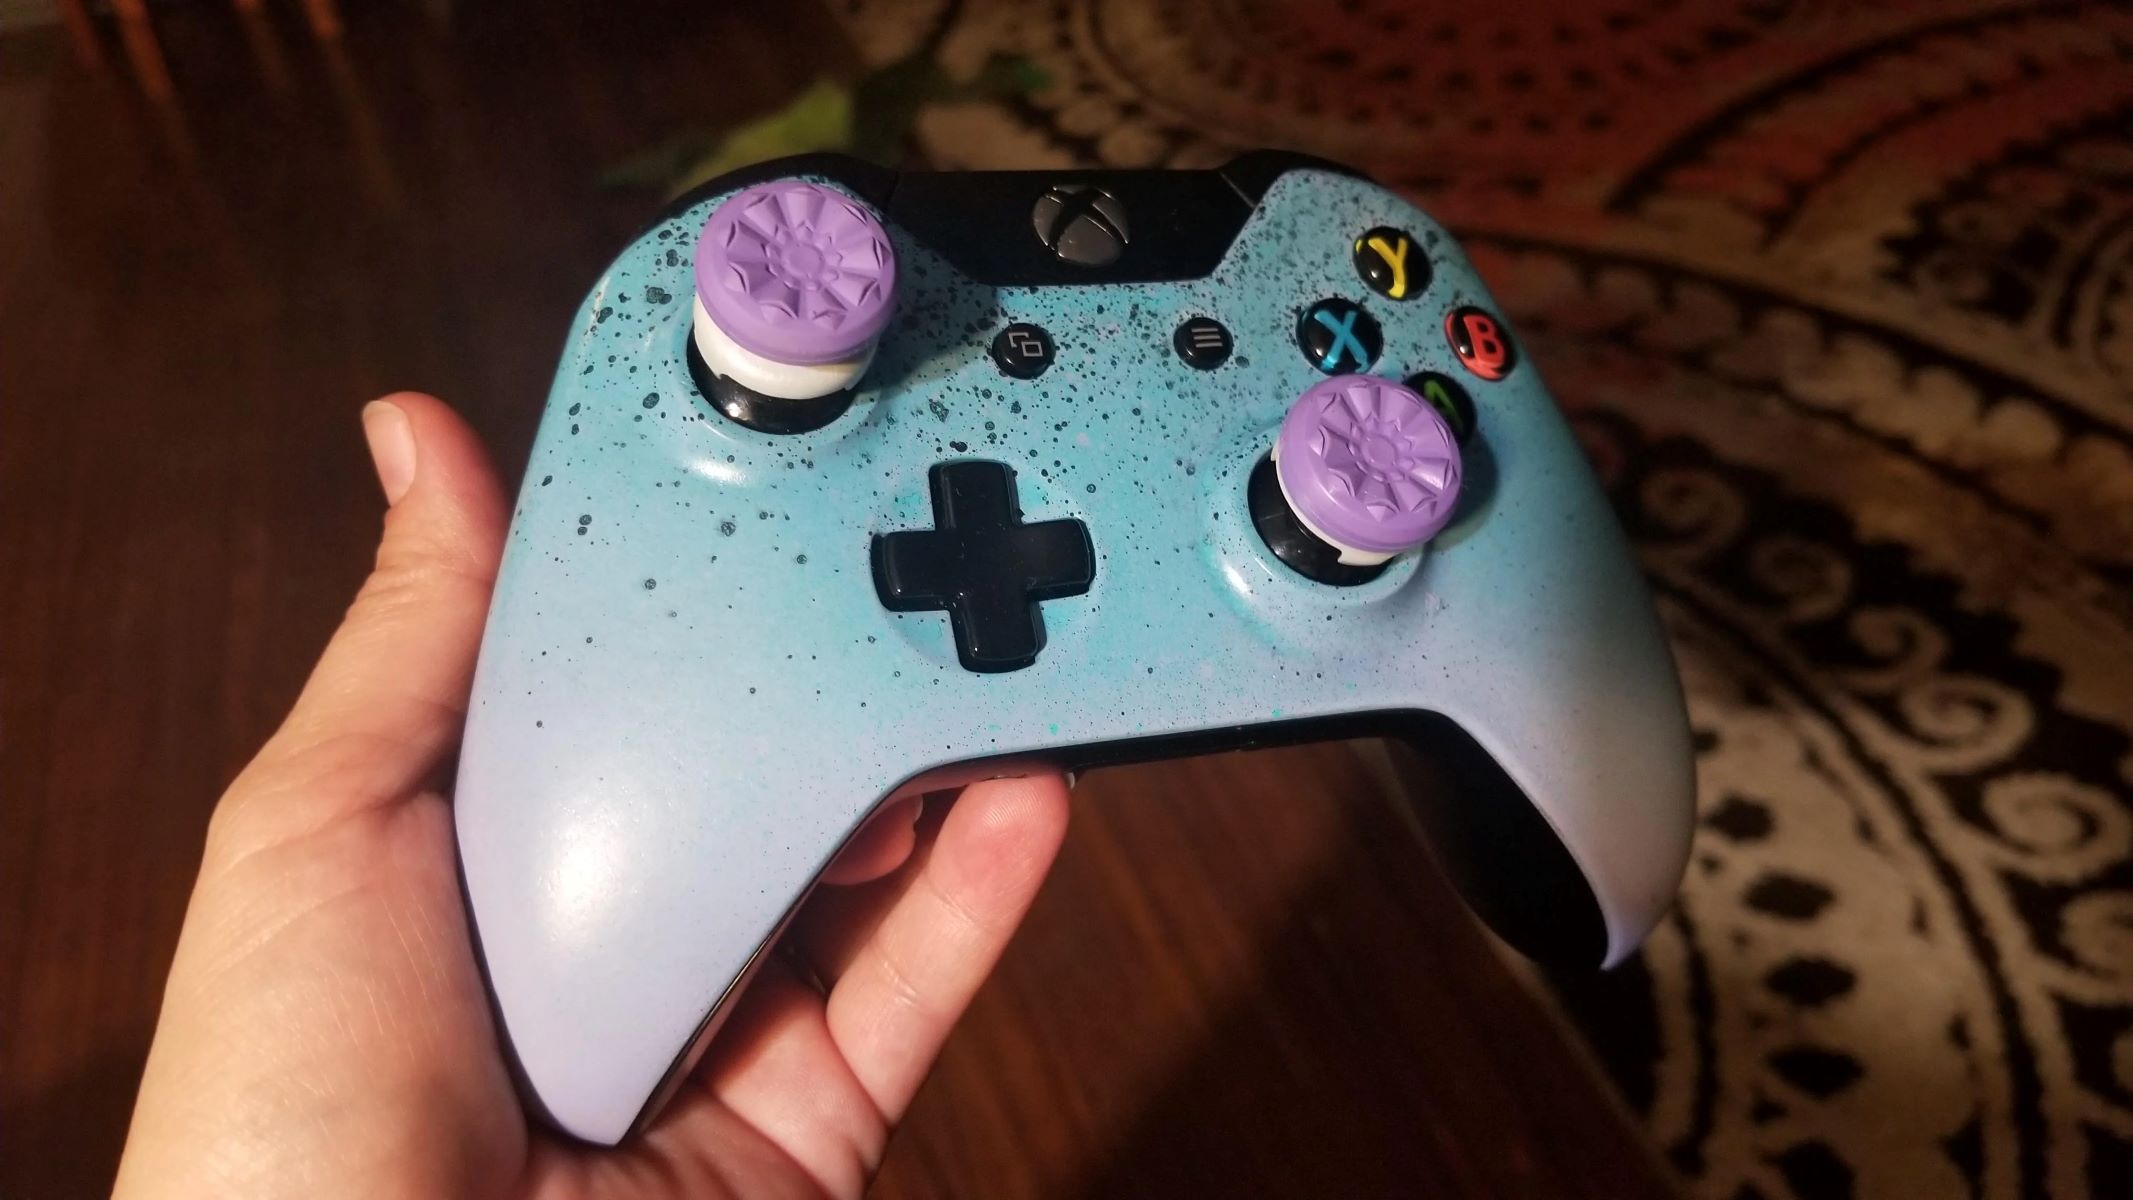 How To Paint A Game Controller